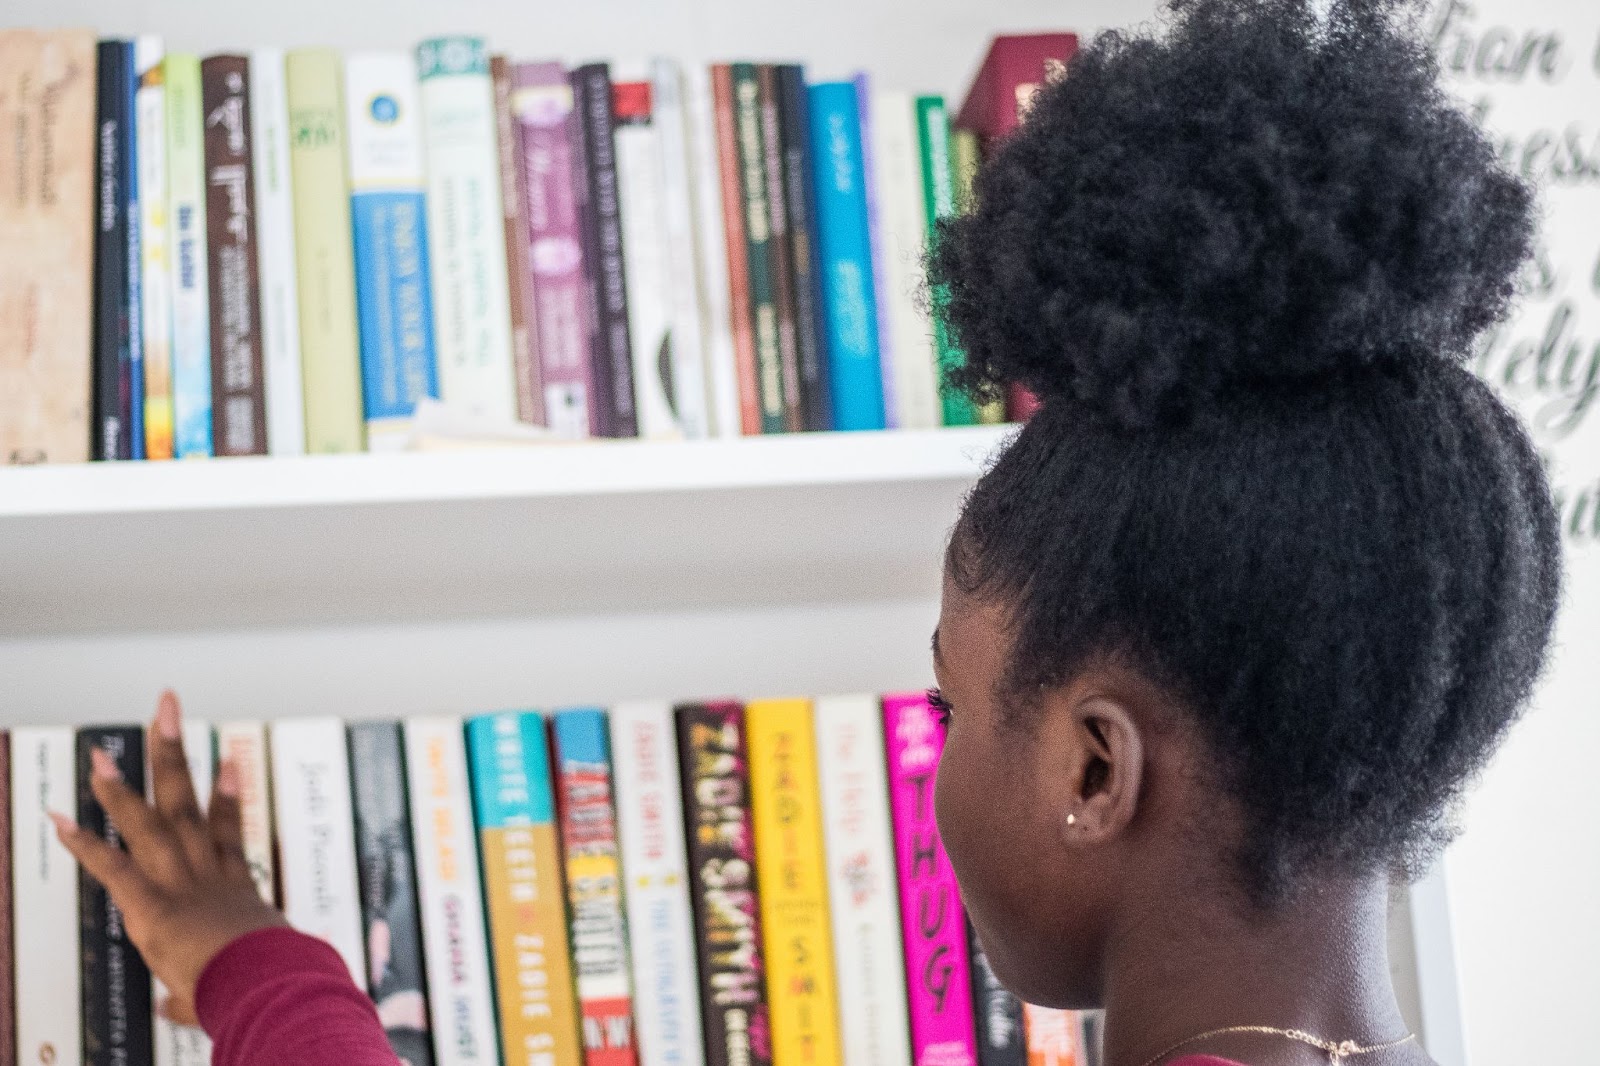 Young Black woman with high ponytail touches books on a shelf.